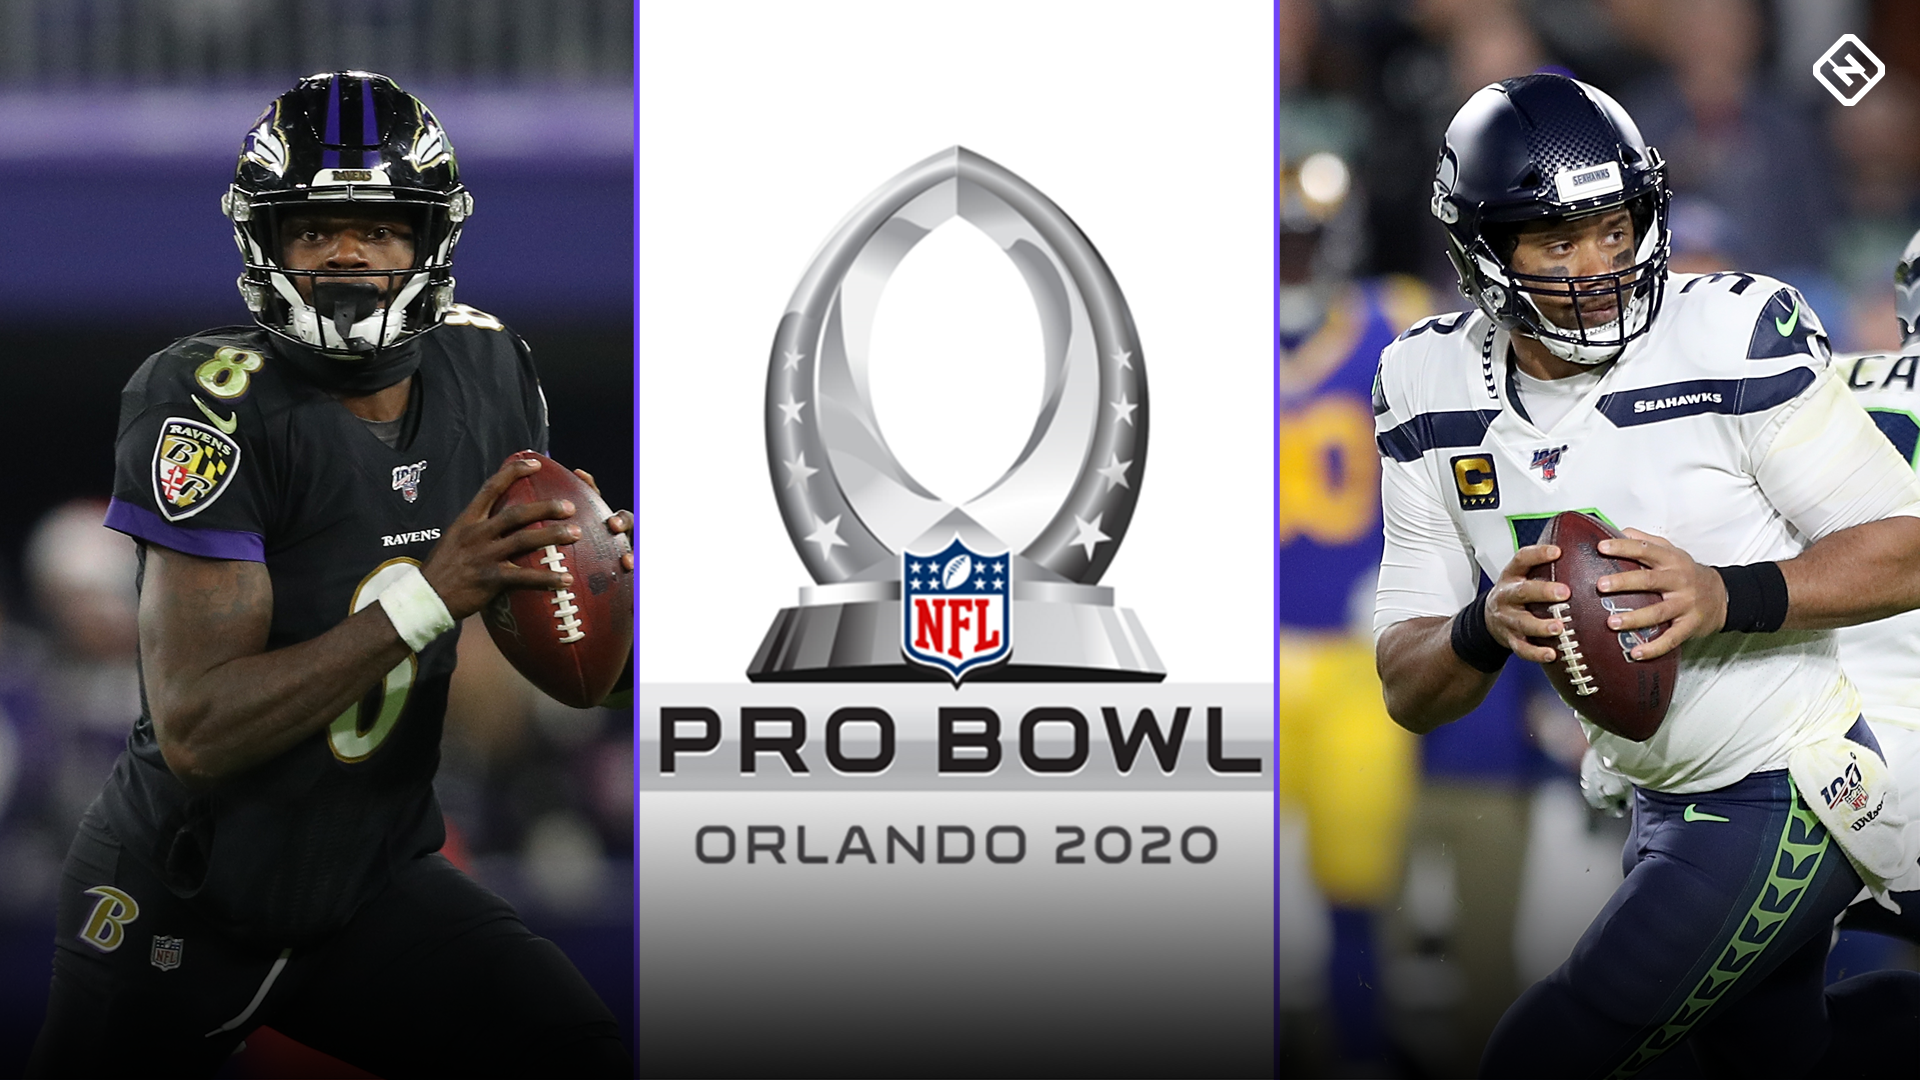 GlibFit 4.0 – 2020 Pro Bowl Edition (late, but read on…)